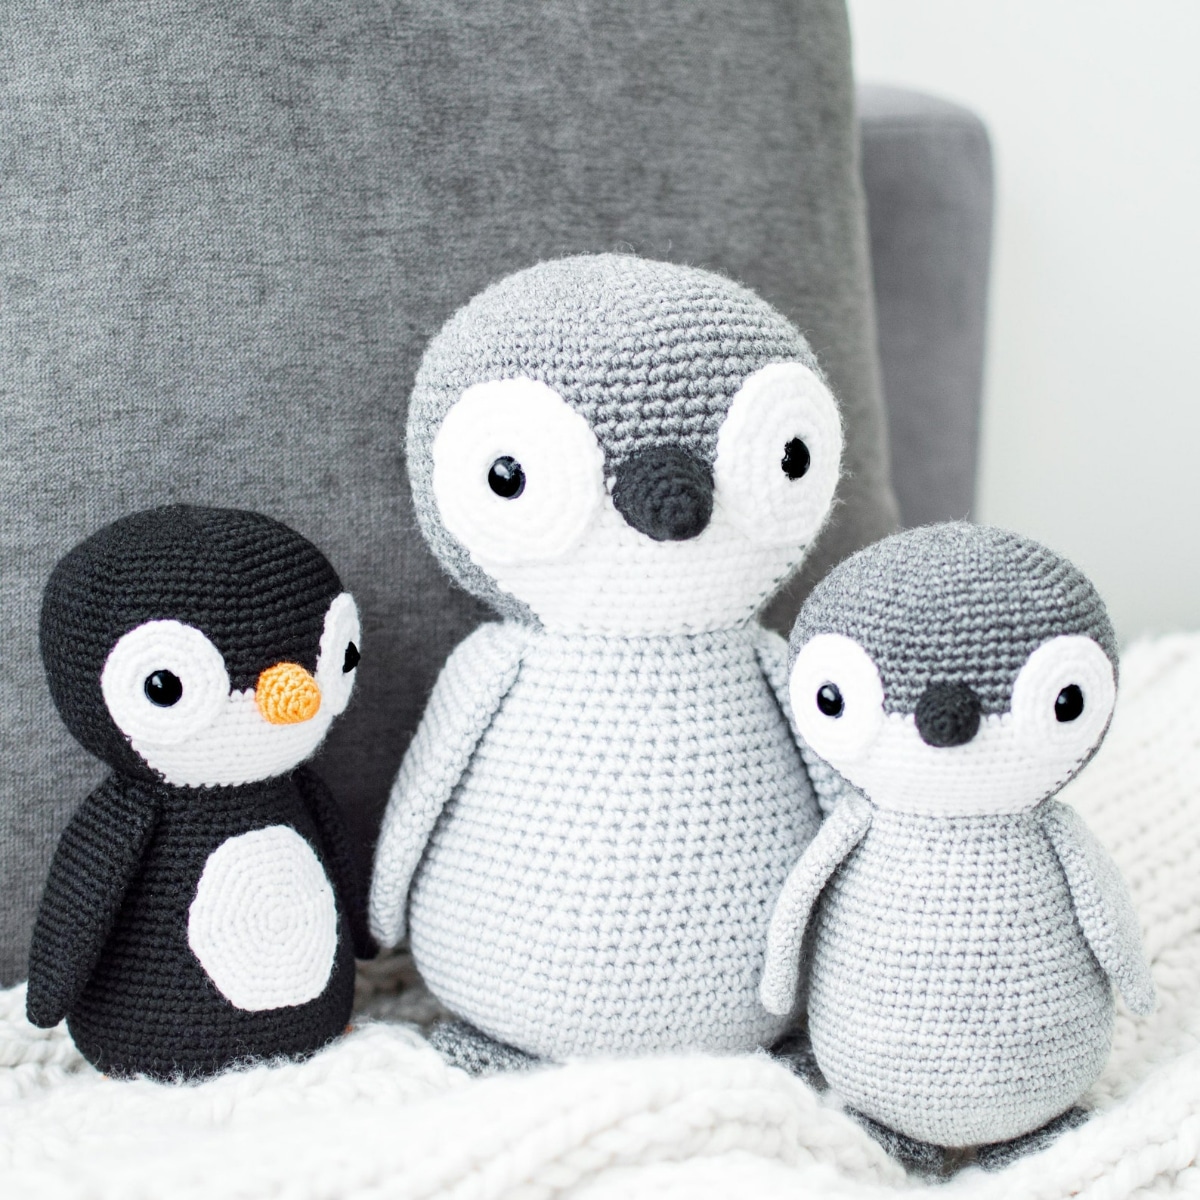 Large grey crochet penguin with a smaller gray penguin and a black and white penguin standing on a white blanket.